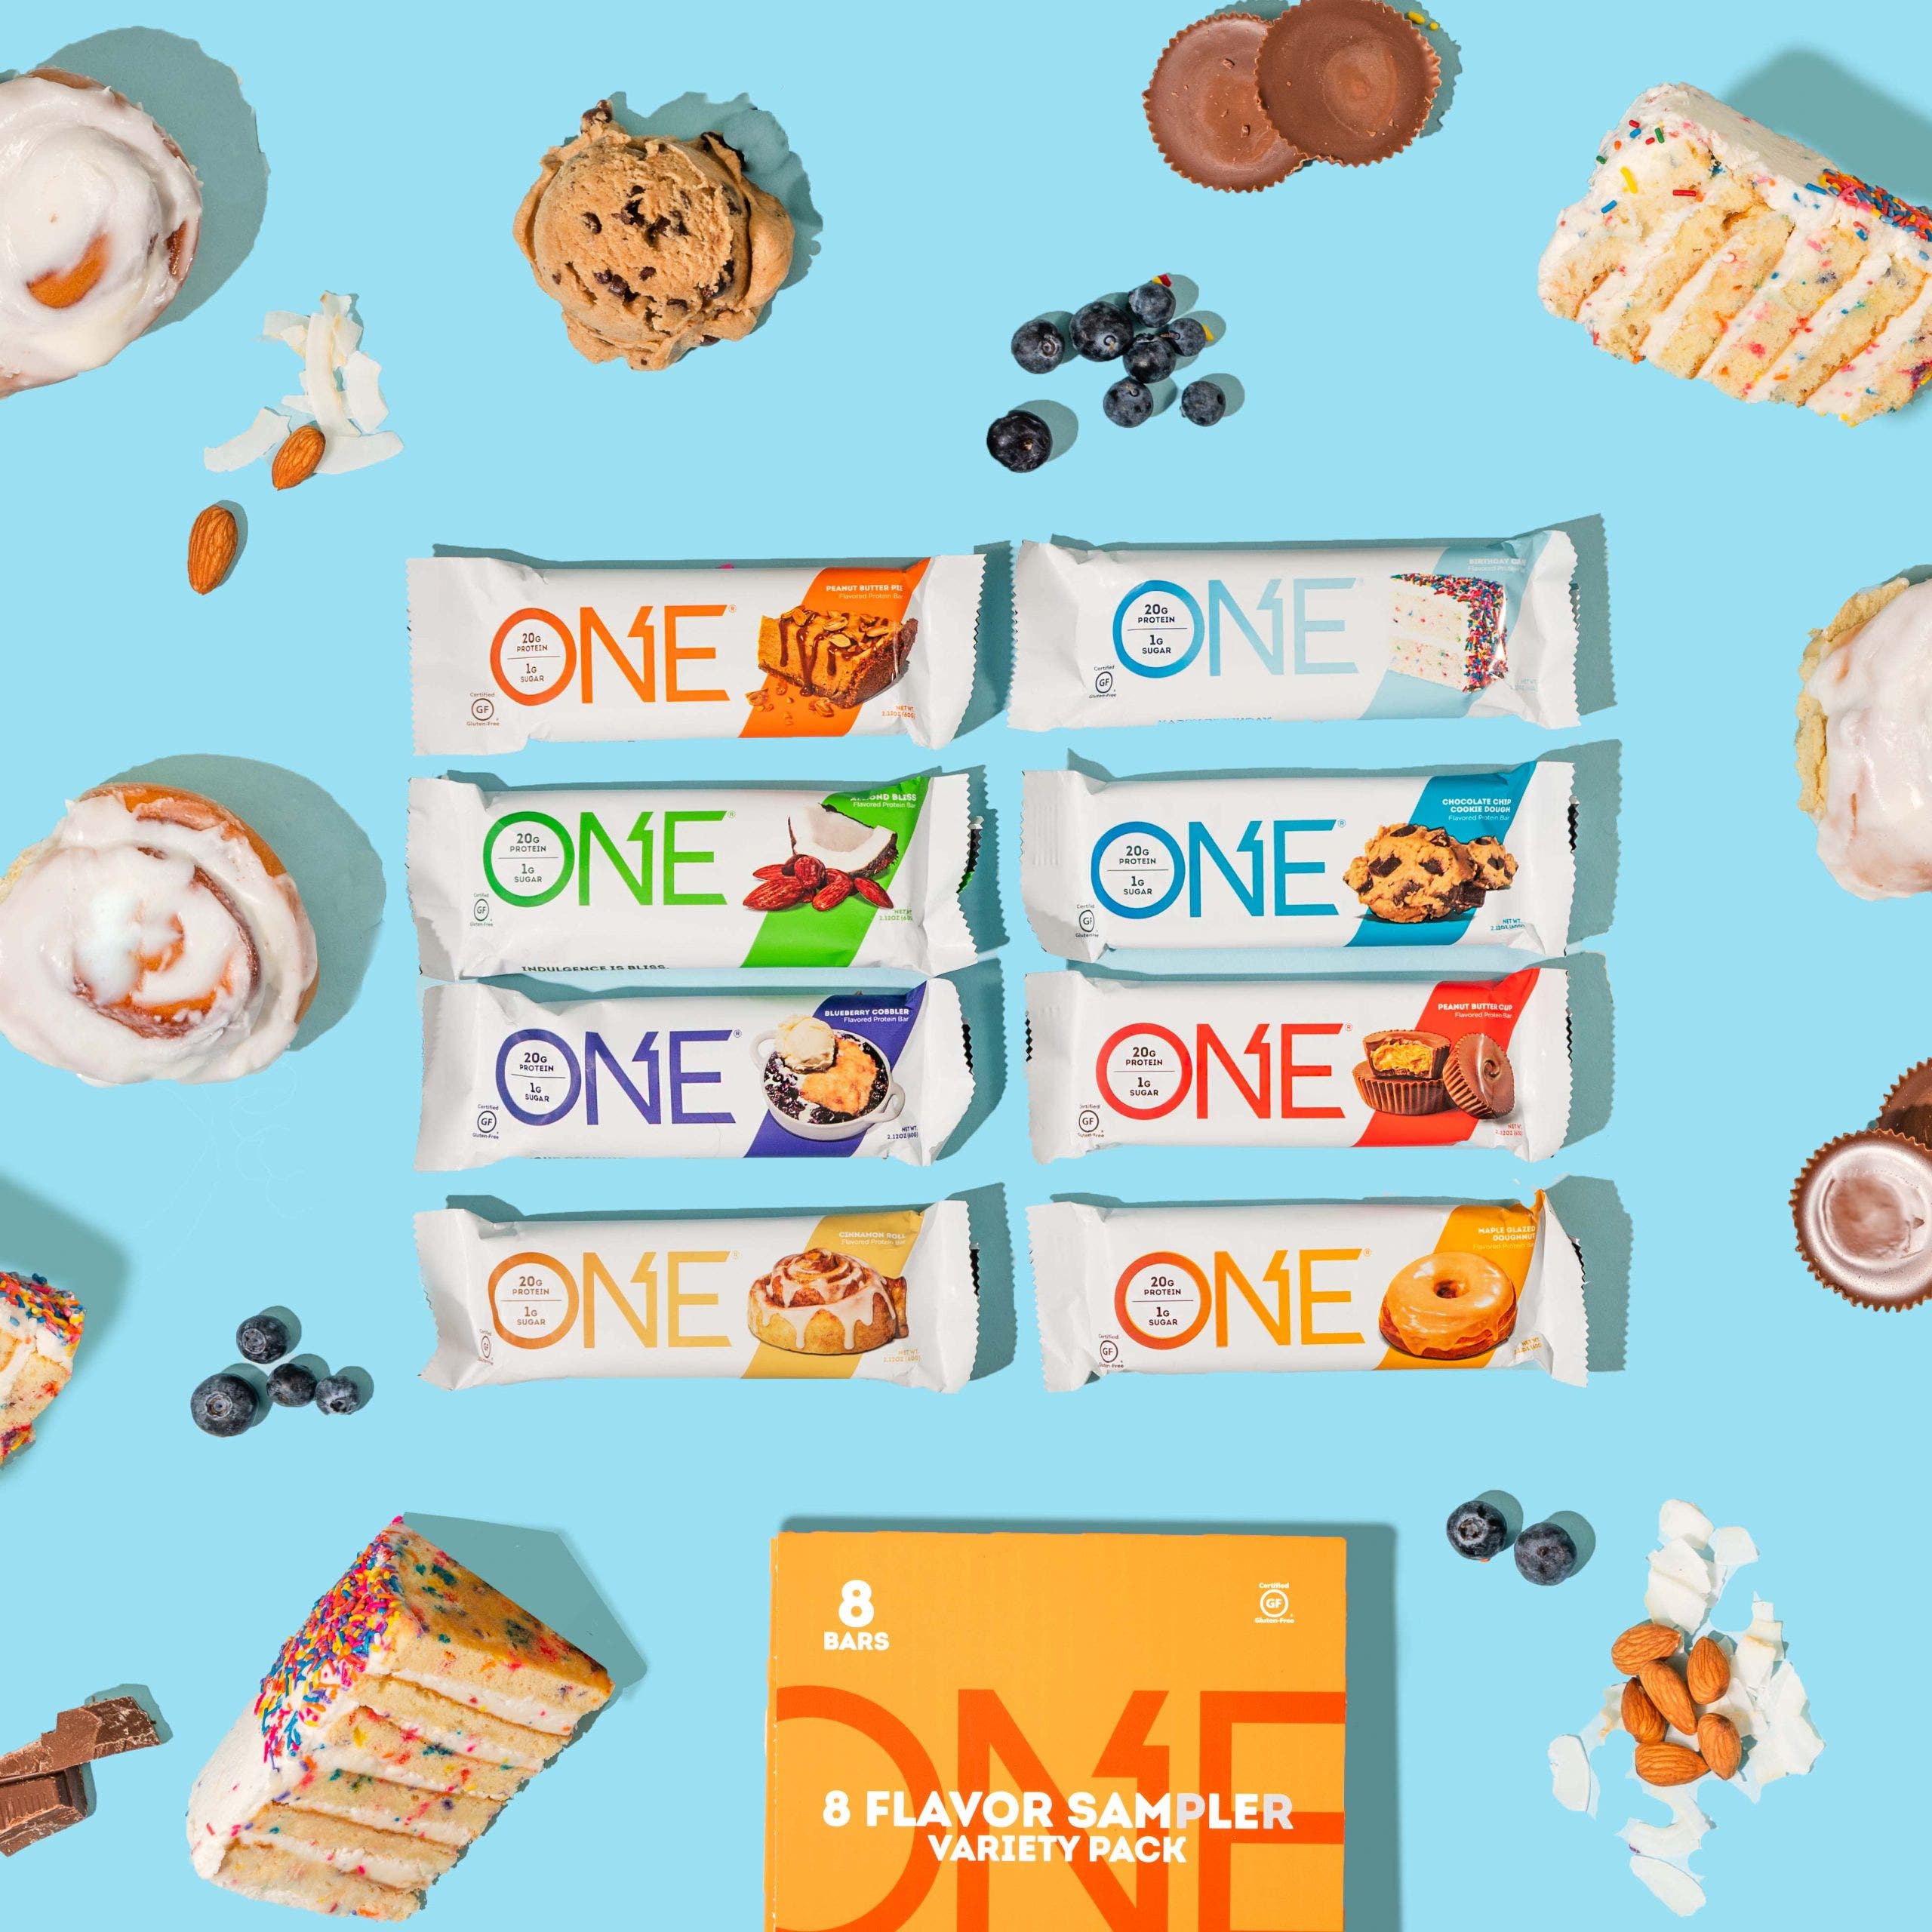 Break from Boring with NEW ONE Sampler Variety Pack